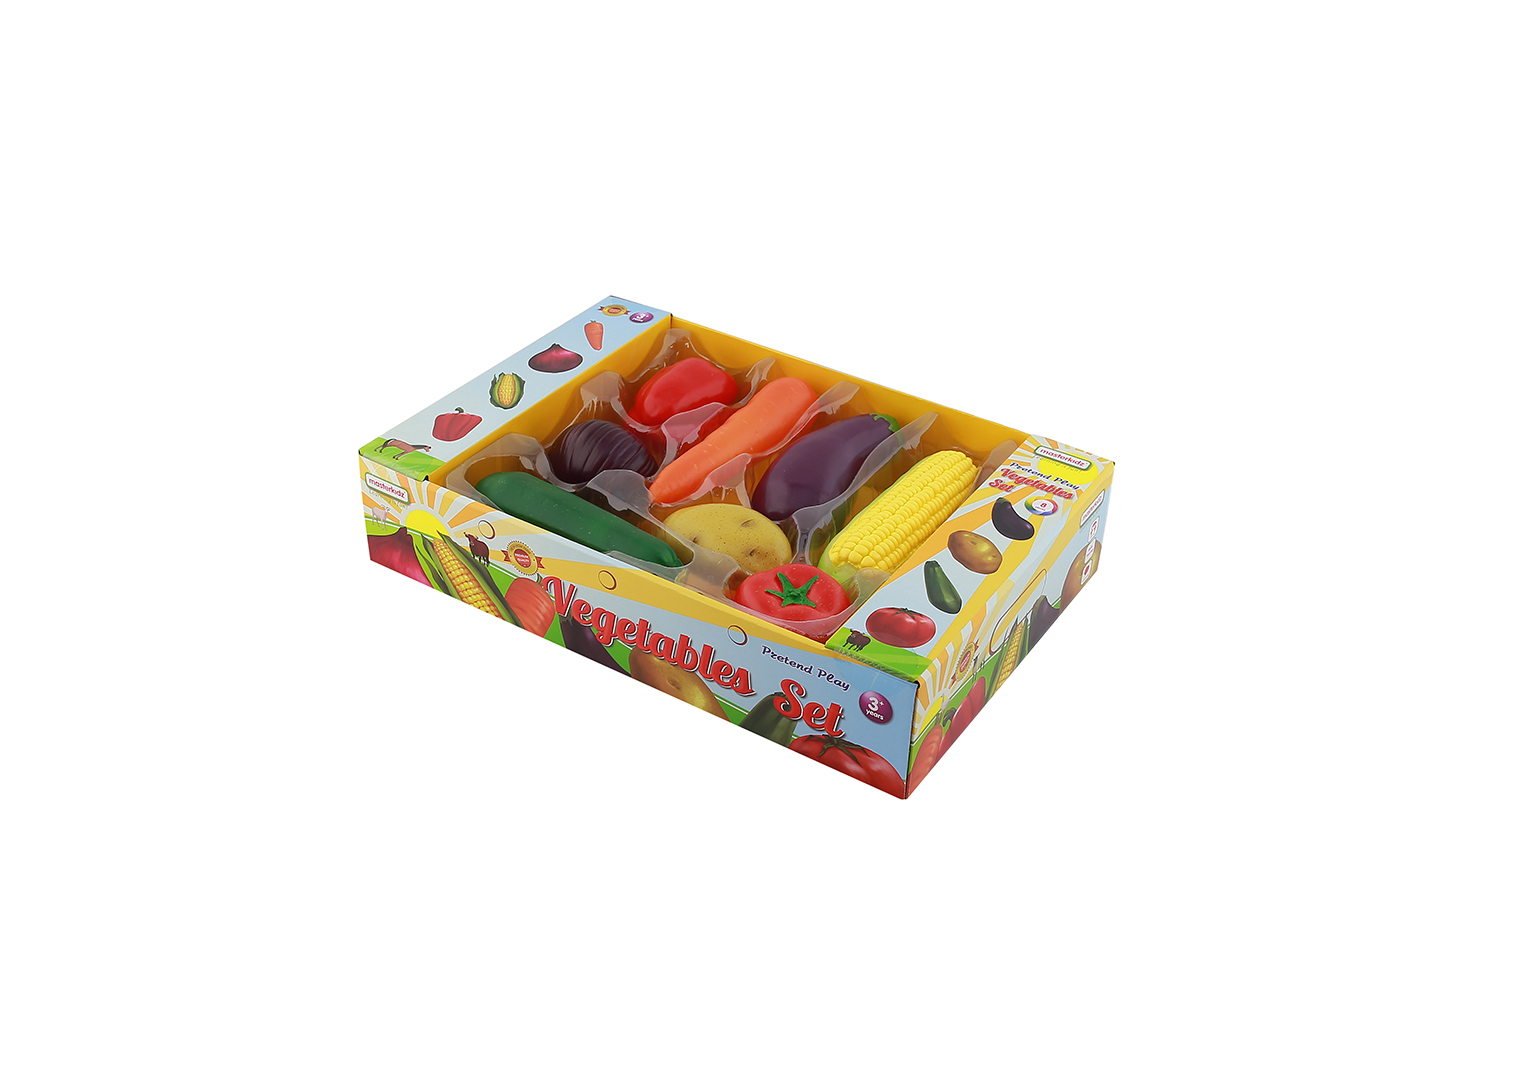 Realistic Food Toy - Vegetable